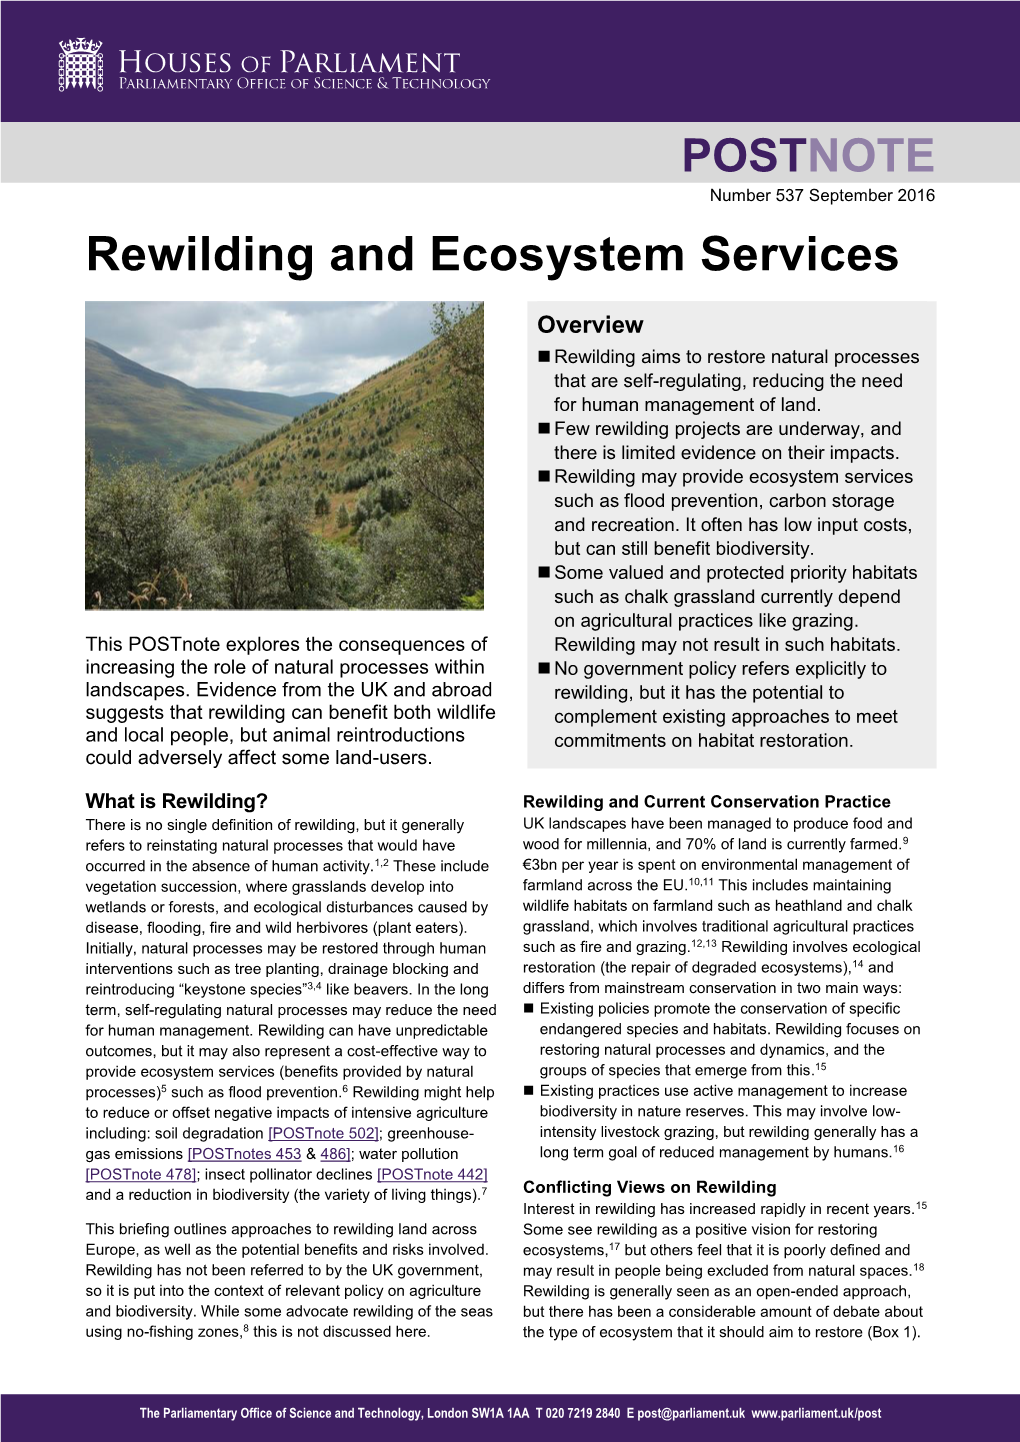 Rewilding and Ecosystem Services